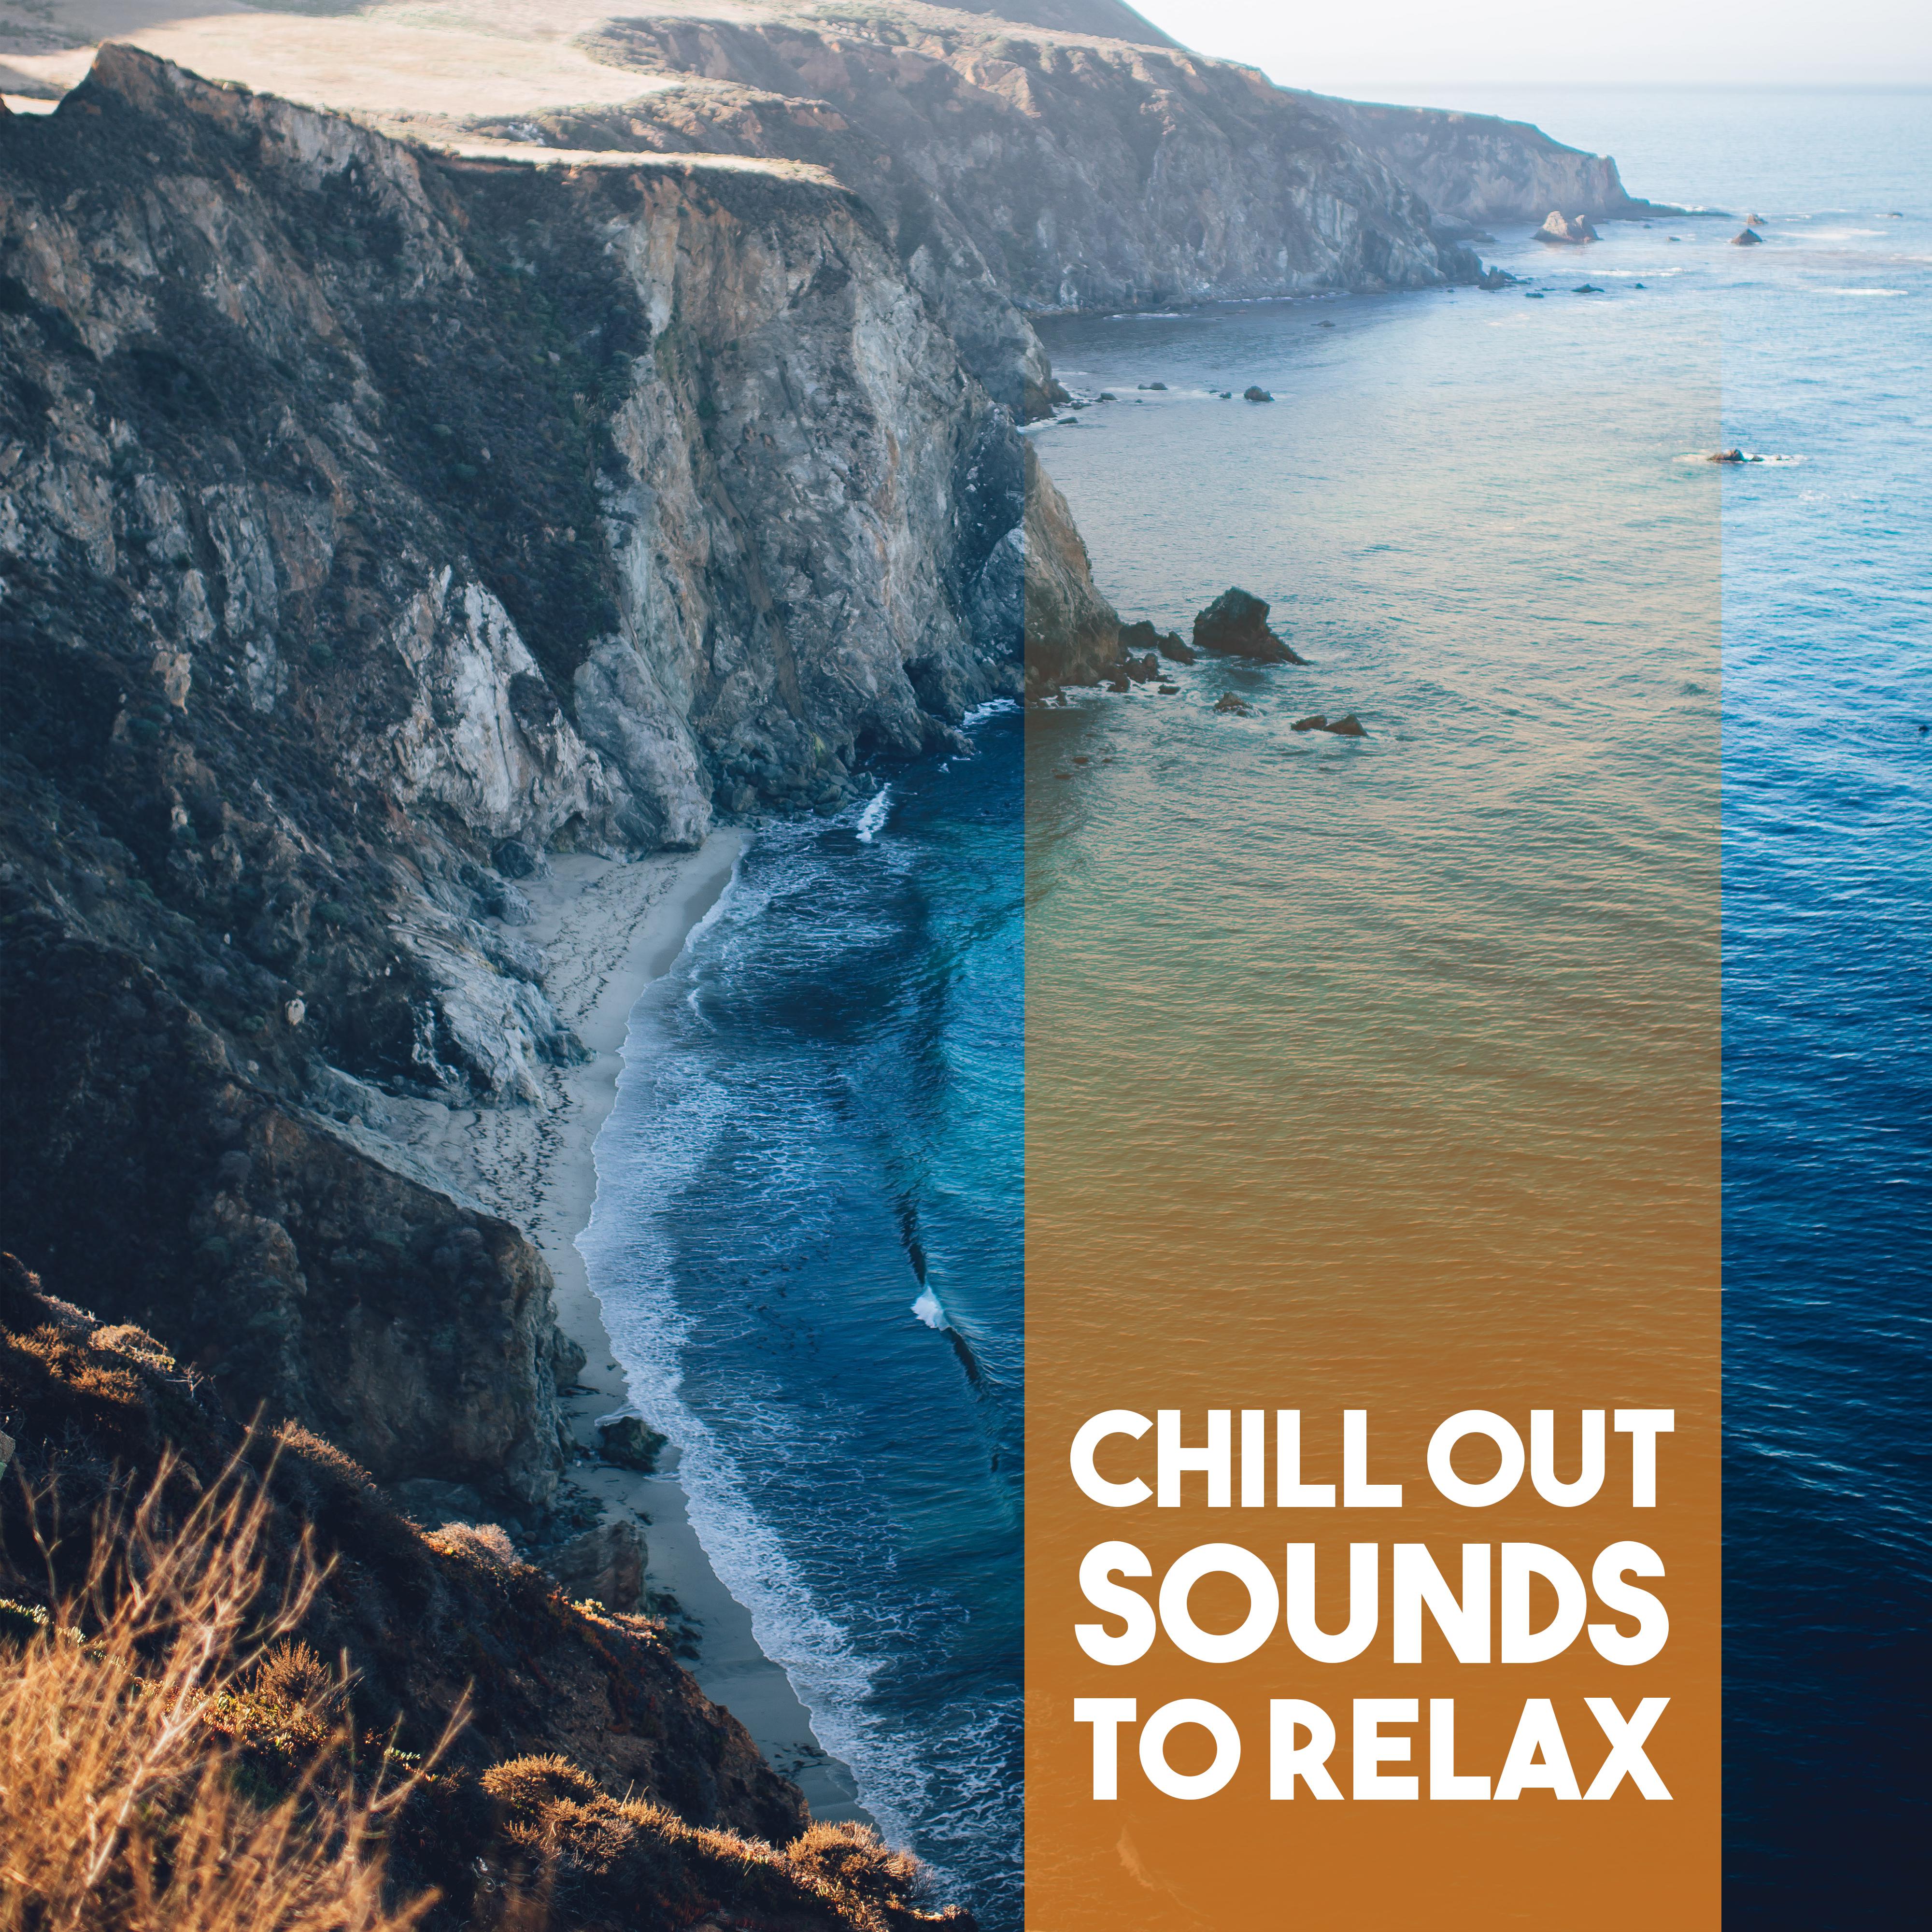 Chill Out Sounds to Relax – Calming Music, Chillout & Relax, Summer Time Sounds, Beach Lounge